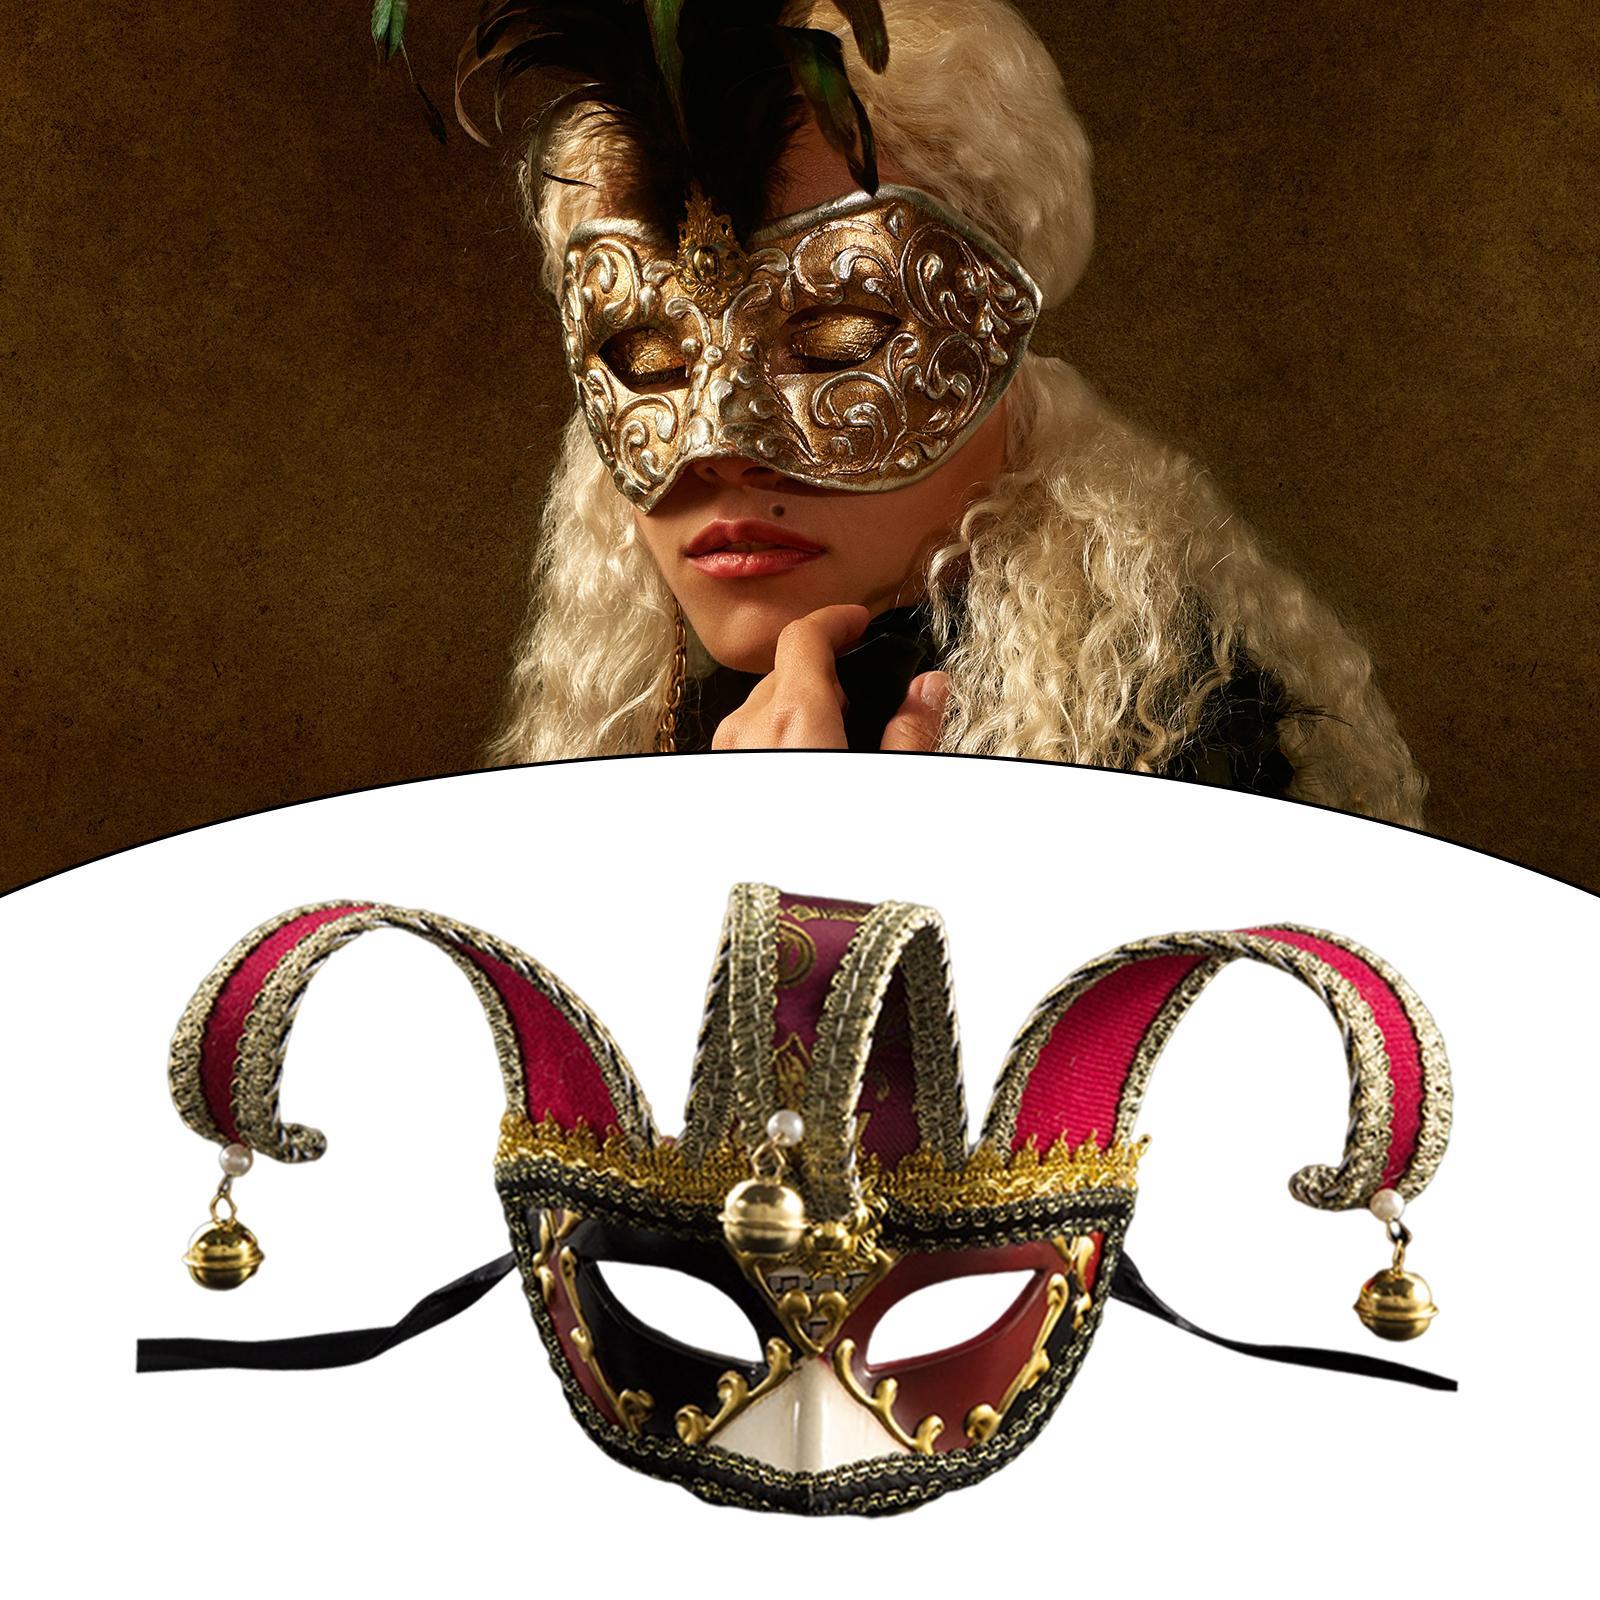 Half Face Mask Costume Cosplay Masquerade Mask Mask for Mardi Gras, Halloween, Party, Festival, Carnival Accessory